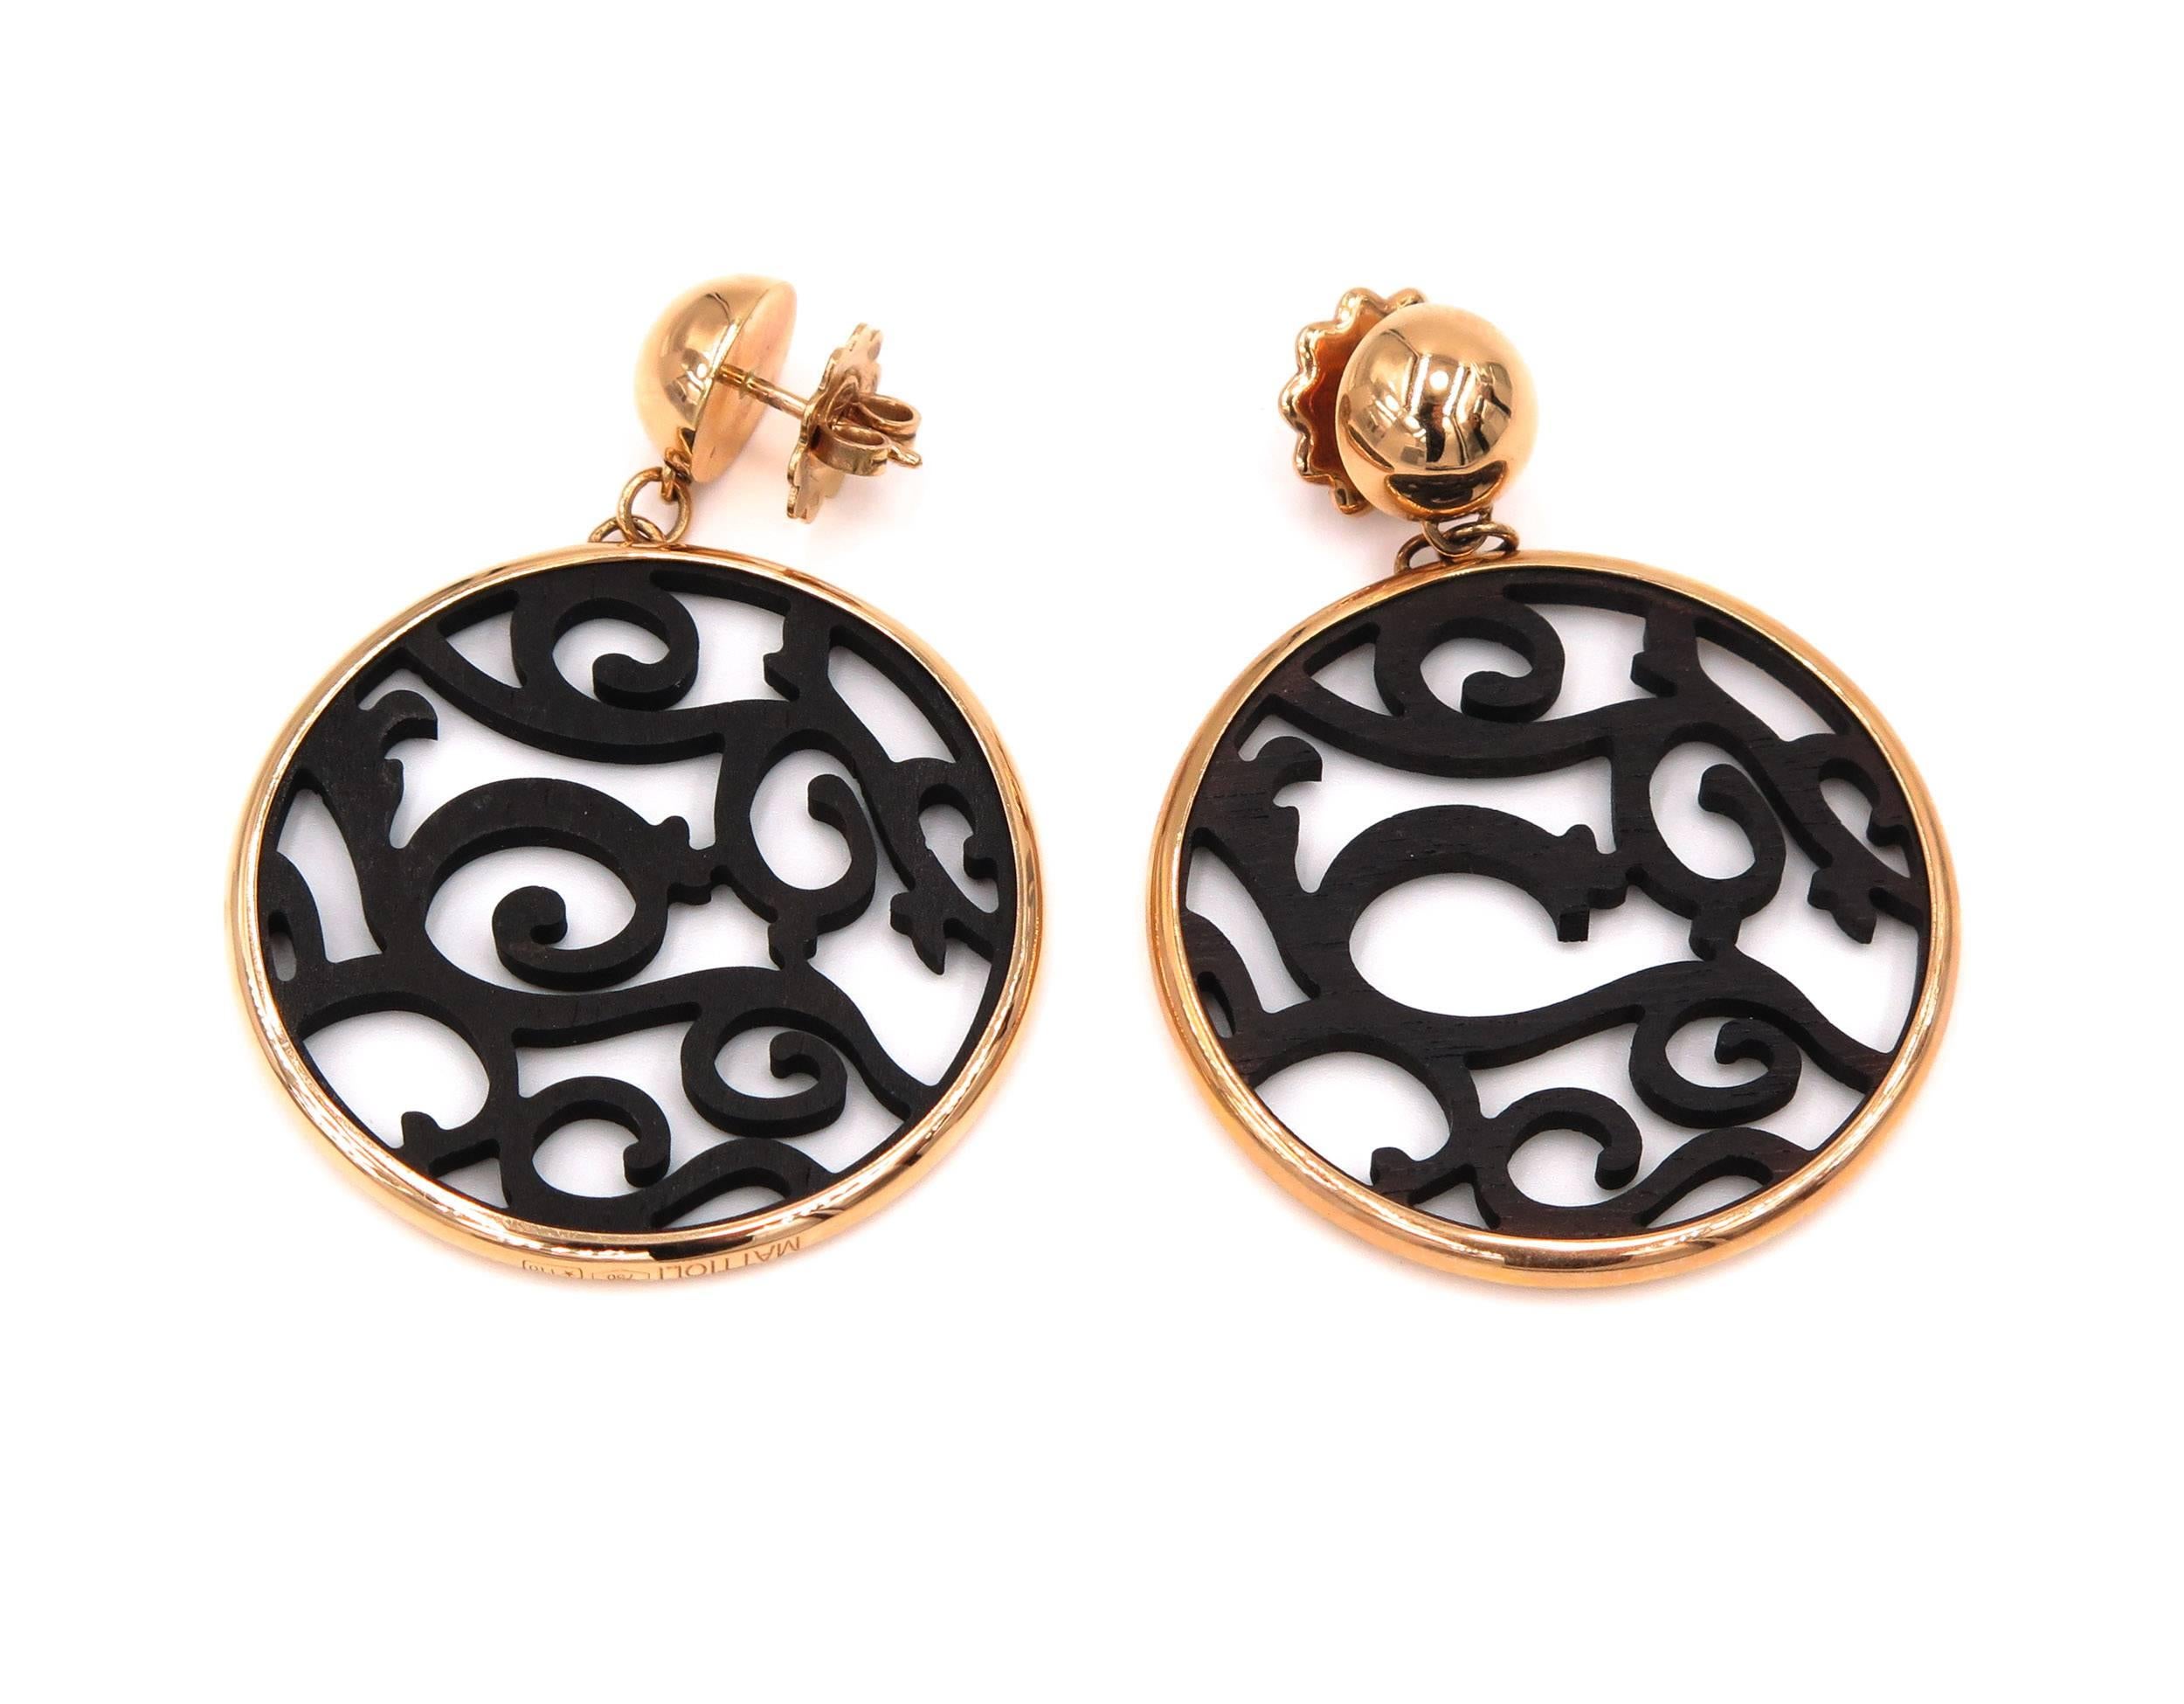 Another Italian interpretation of beauty, simplicity and elegance by Mattioli. The Siriana Earrings echoes the vision of the East with styled floral design inspiration. Hand-carved ebony framed by a soft 18 karat rose gold. Bold and Stunning!
